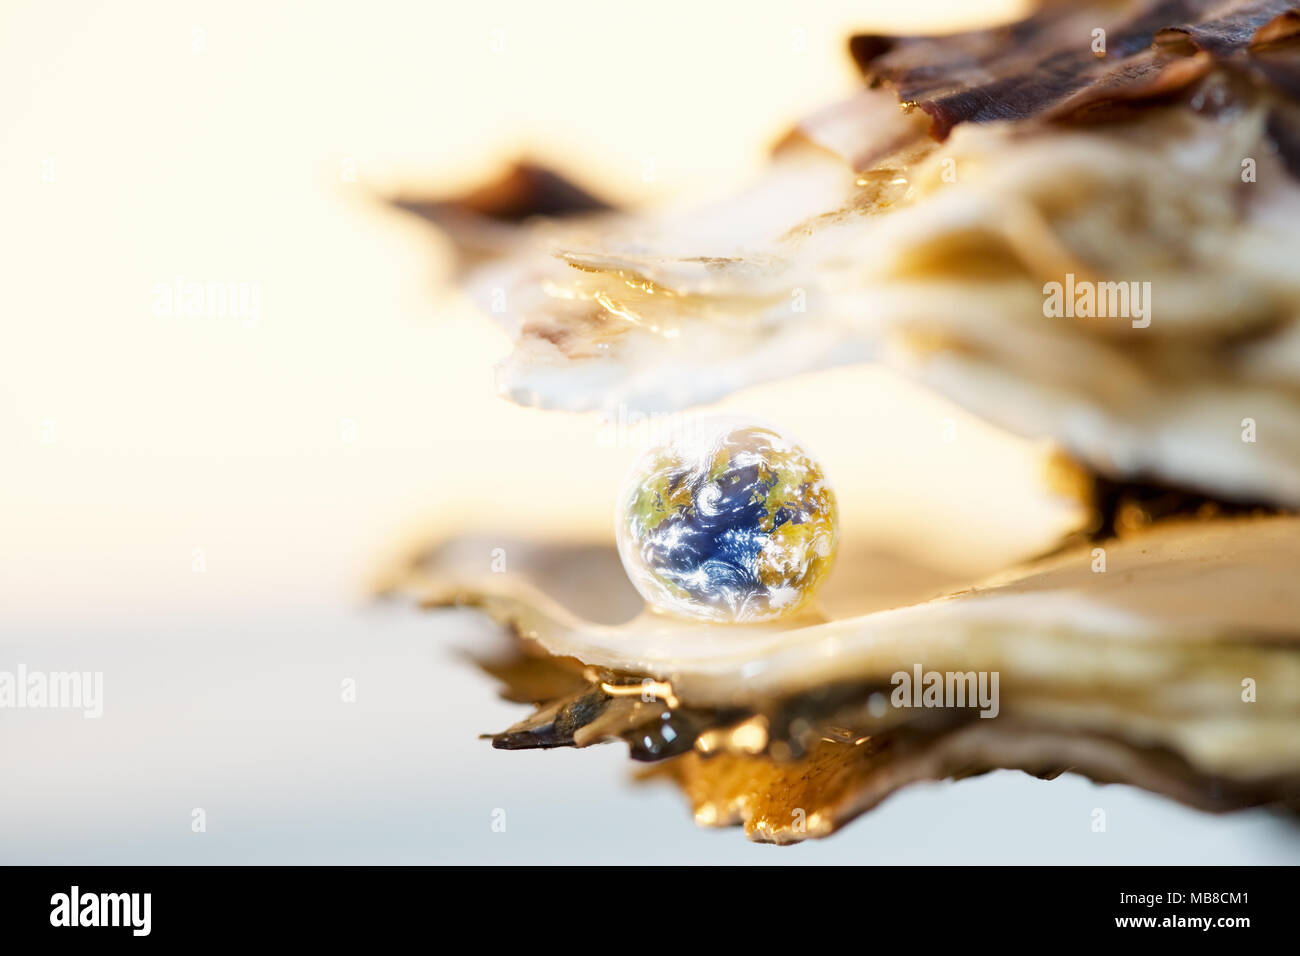 Planet earth in an oyster shell Stock Photo